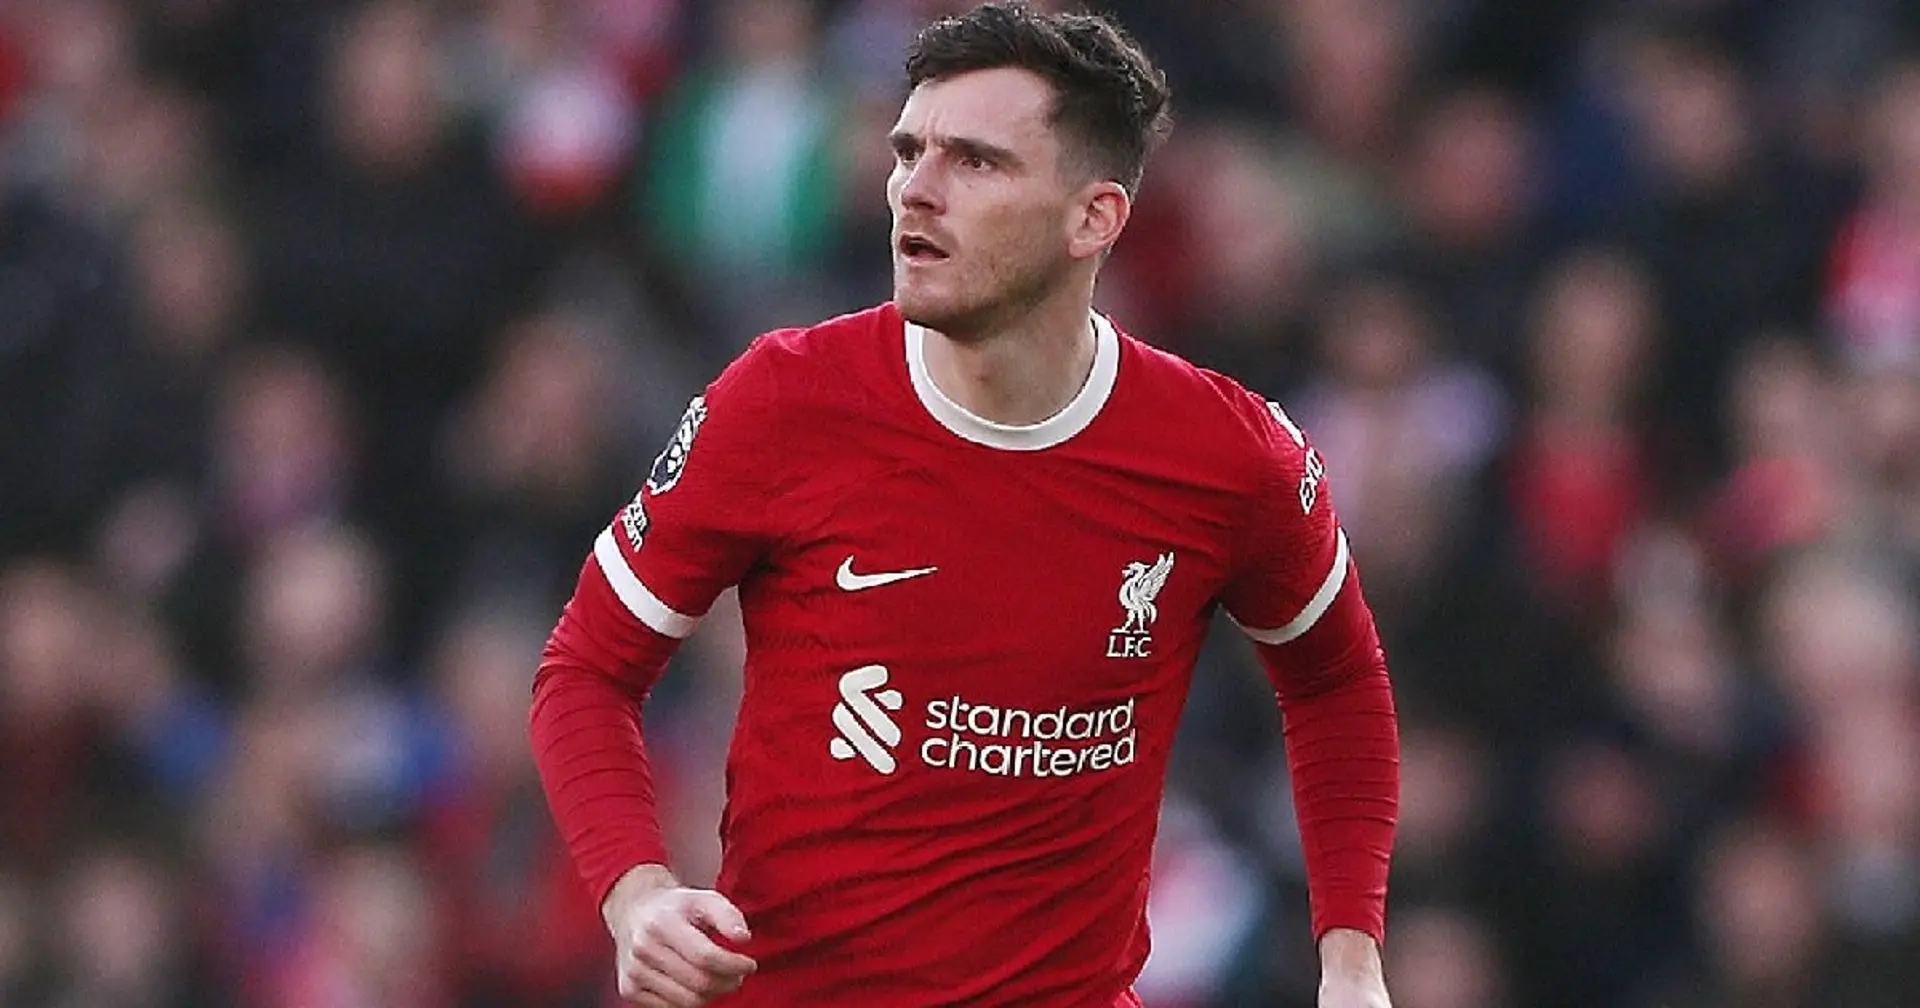 'We've got to put it right today': Robertson hoping for reaction ahead of Liverpool vs West Ham